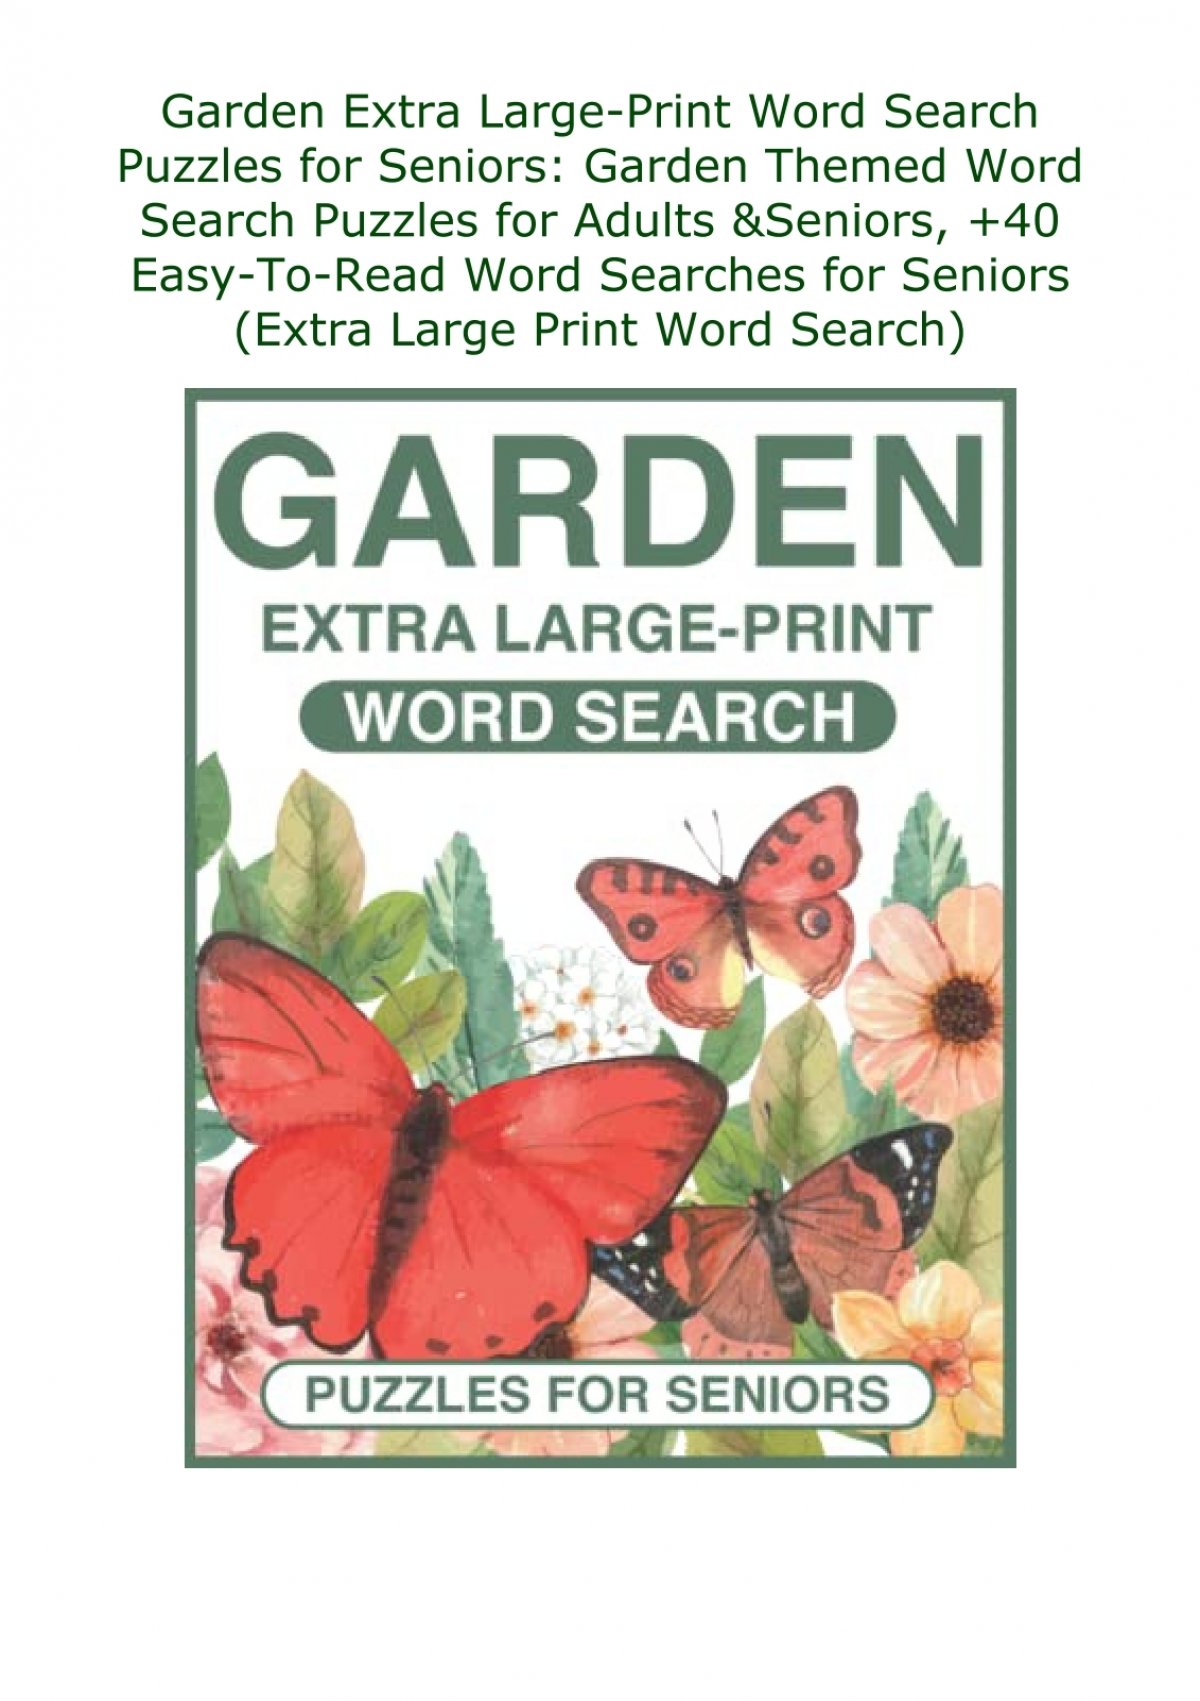 epub-pdf-garden-extra-large-print-word-search-puzzles-for-seniors-garden-themed-word-search